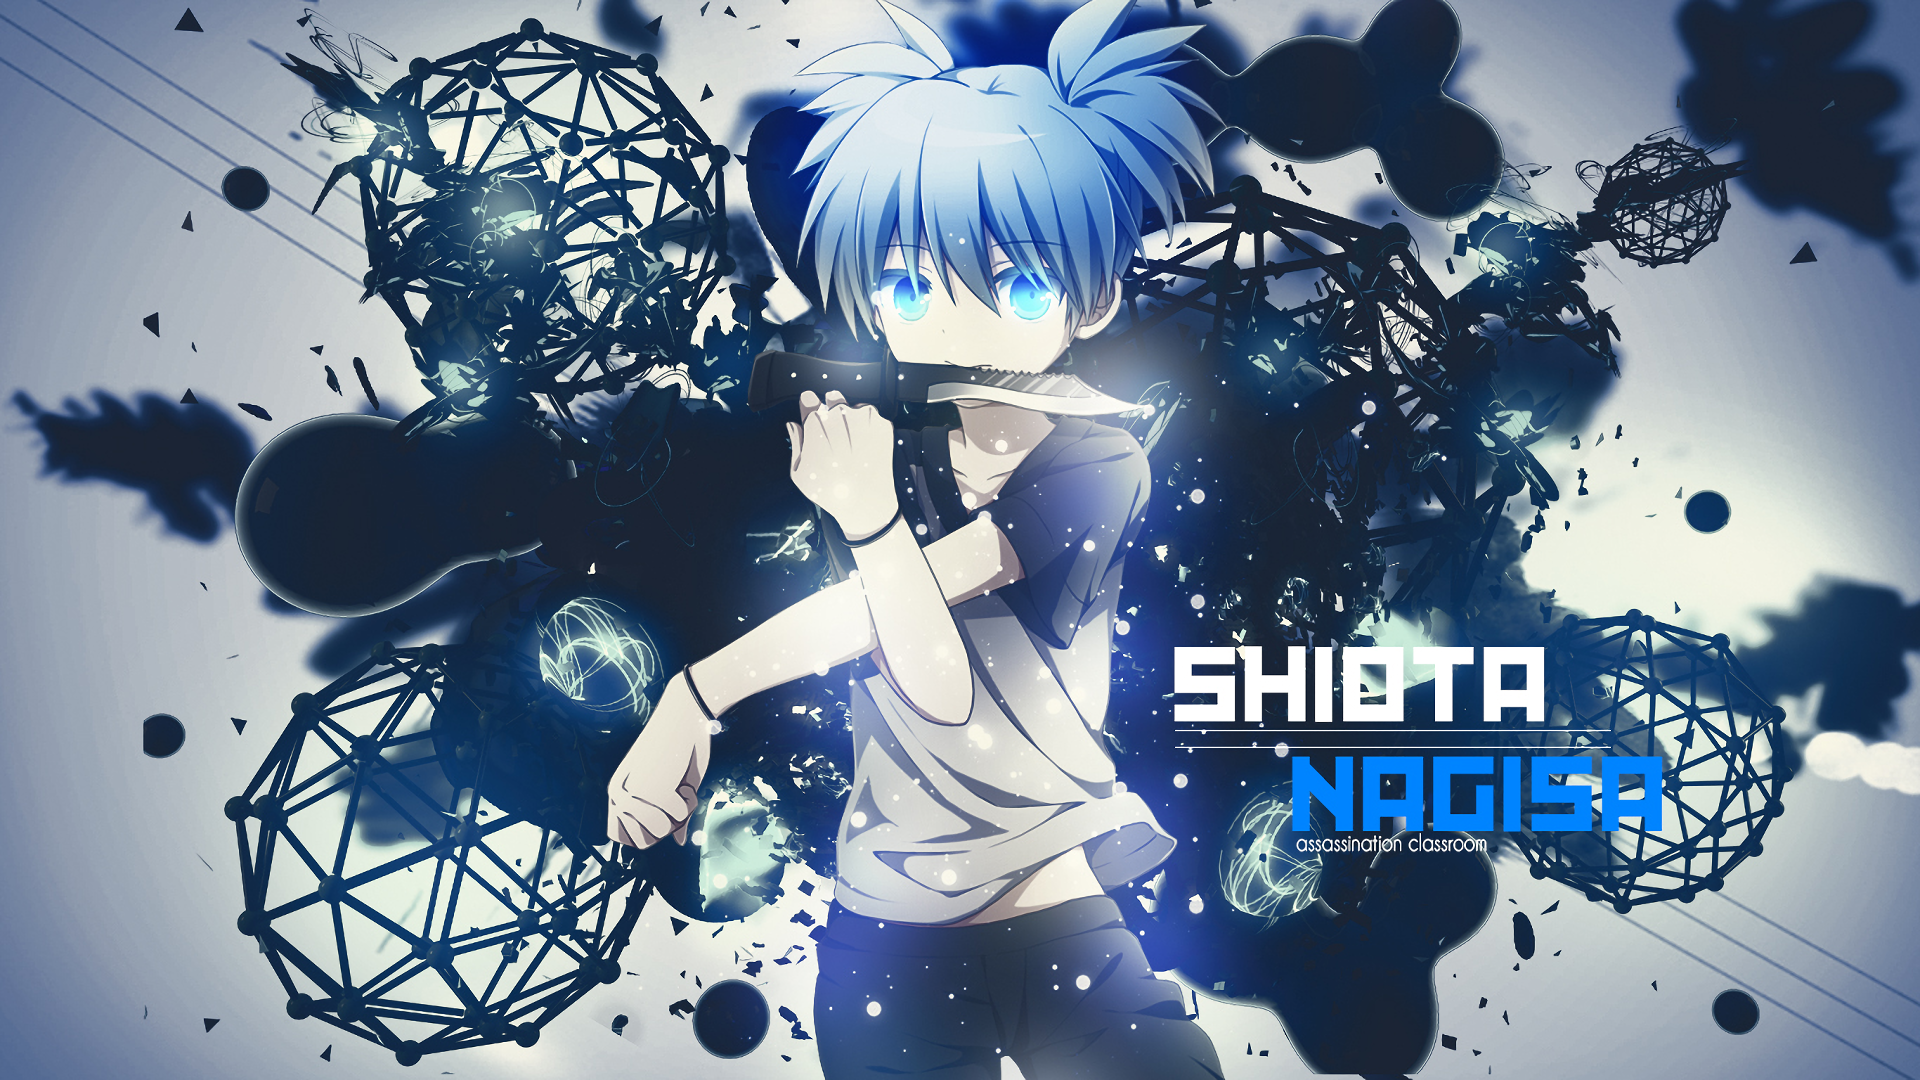 Anime Assassination Classroom HD Wallpaper by 575 (pixiv)